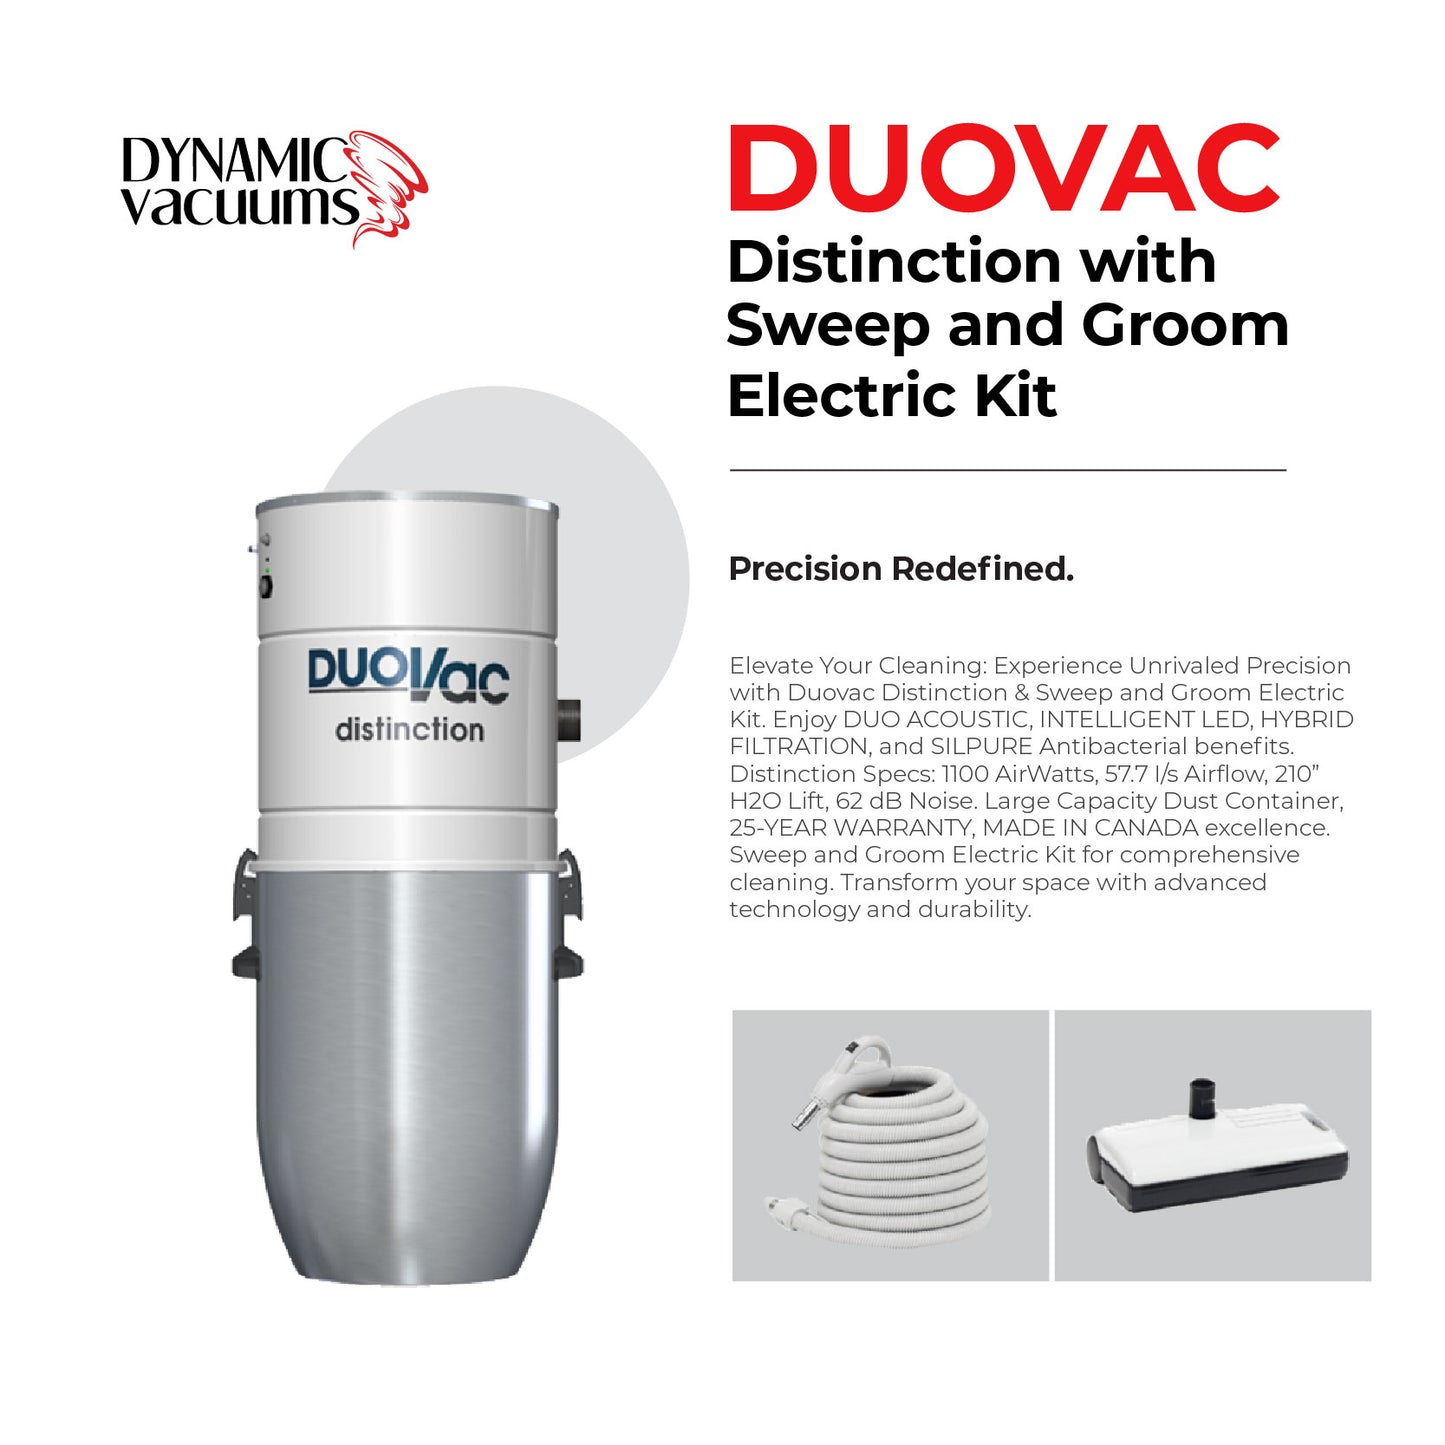 Duovac Distinction with Sweep and Groom Electric Kit